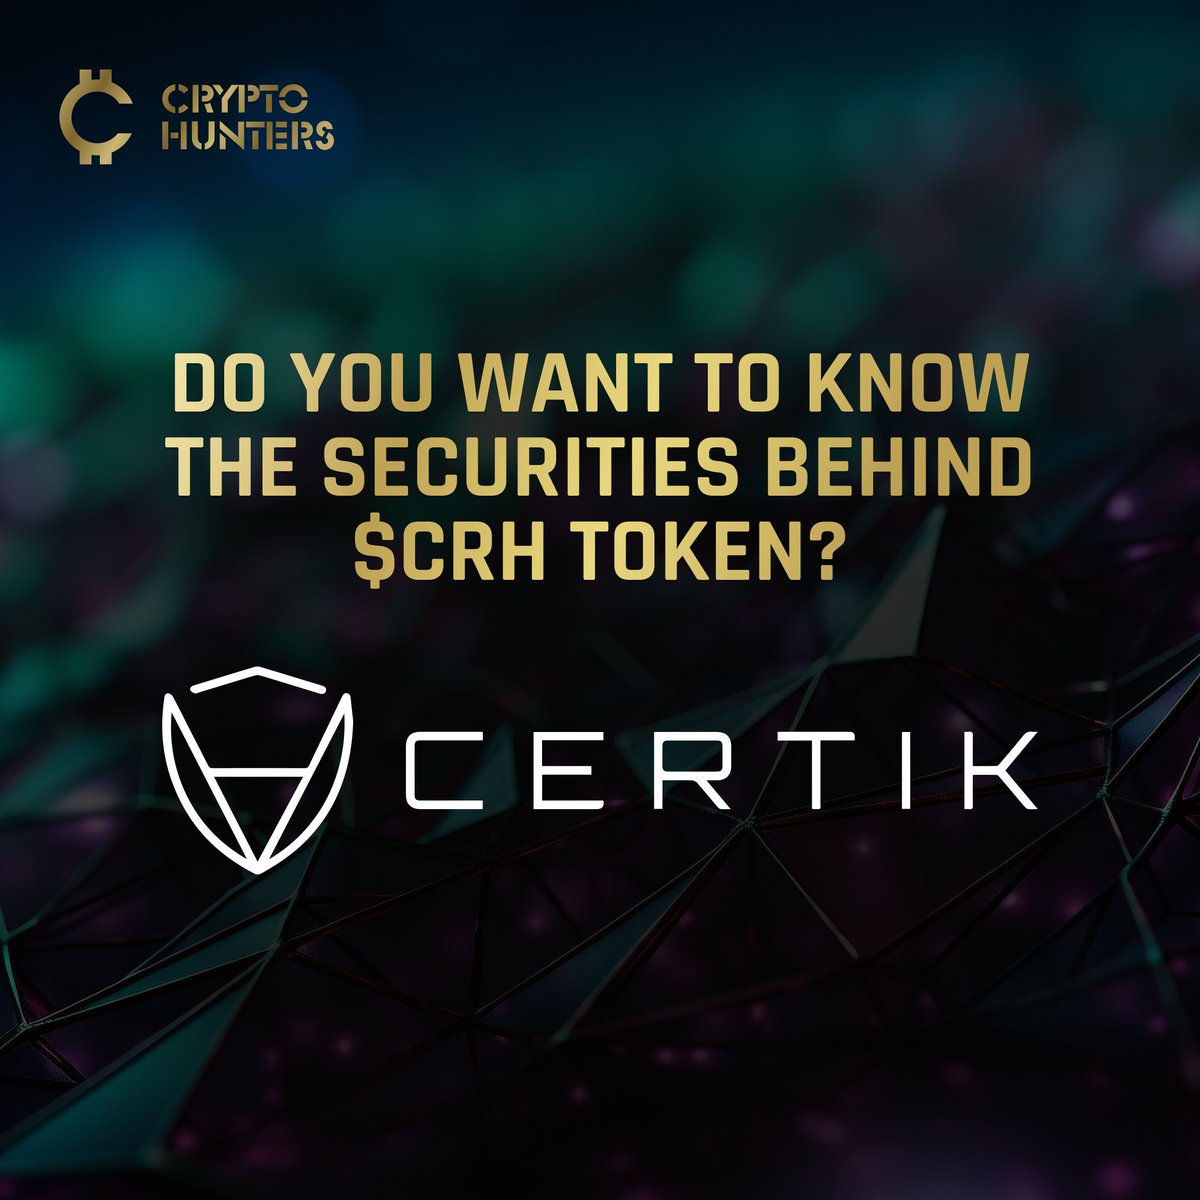 Want to learn about the security measures behind $CRH TOKEN?

$CRH has undergone a rigorous @CertiK audit, ensuring a high level of security for the project's code.

CertiK is the seal of approval for project security.

#crypto #web3 #jointhehunt